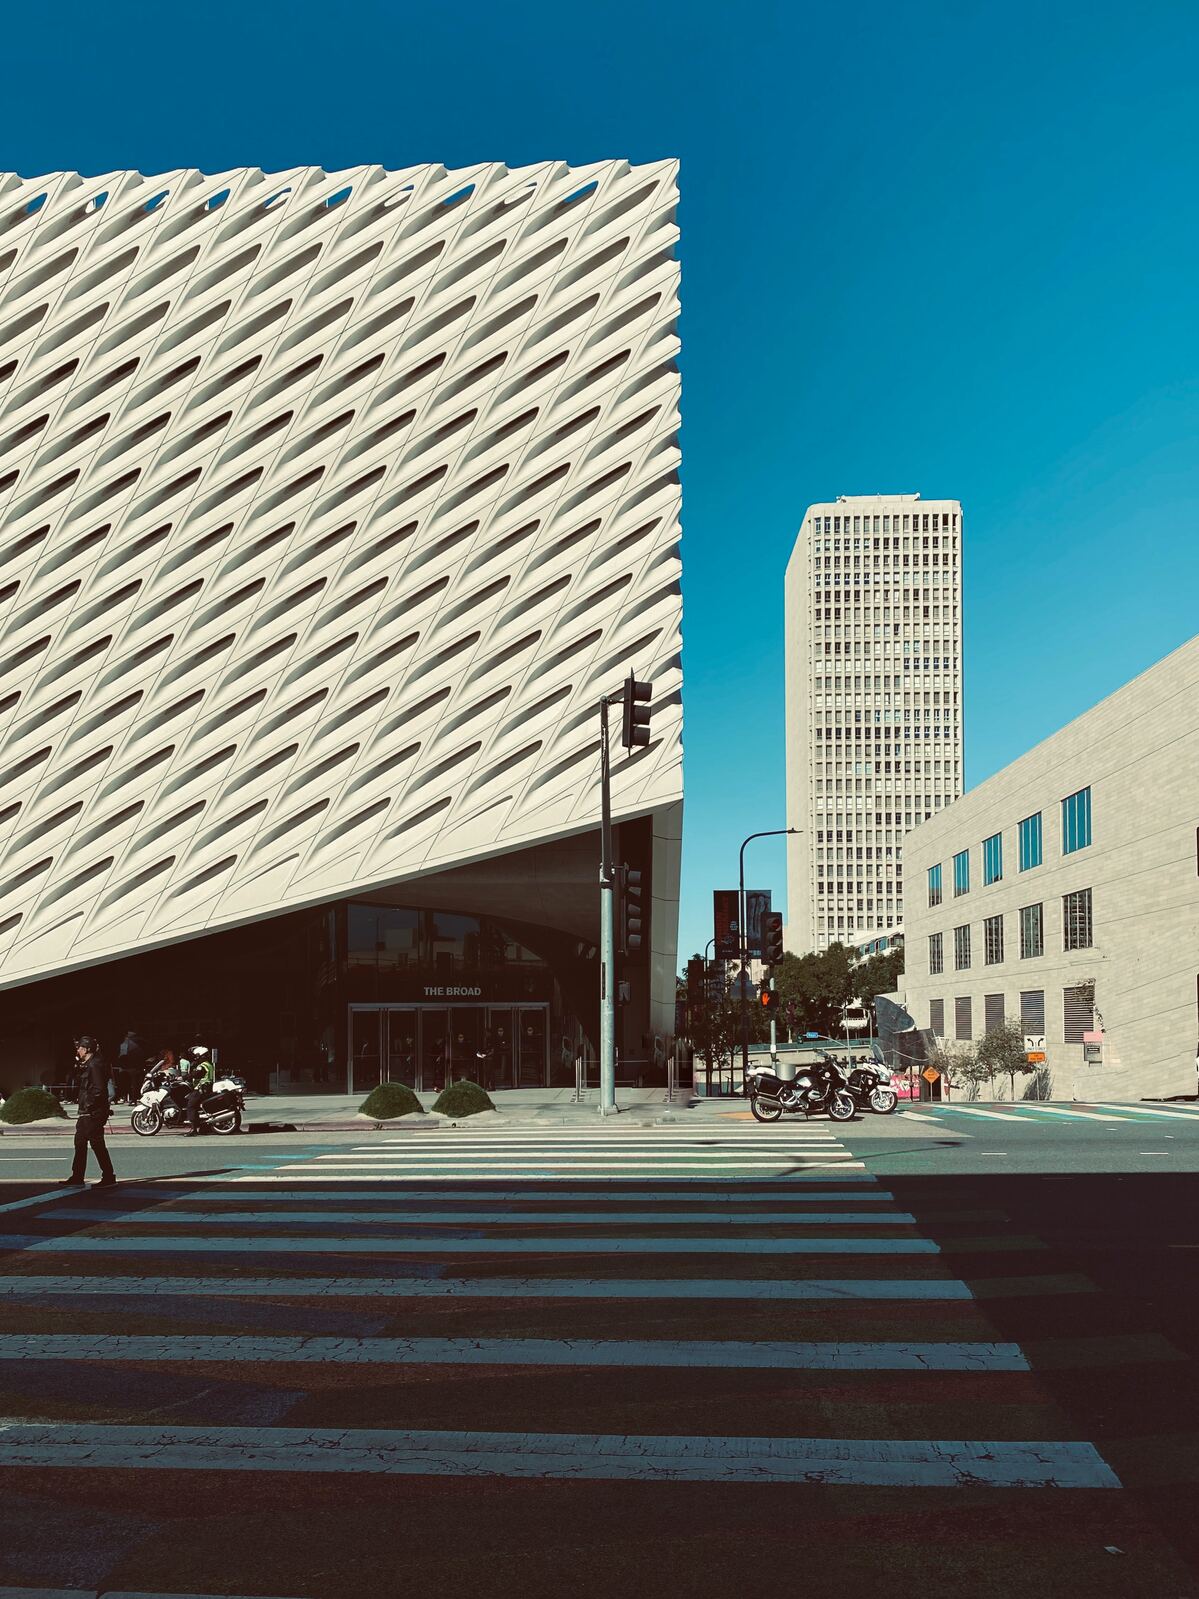 Image of The Broad Building by Team PhotoHound